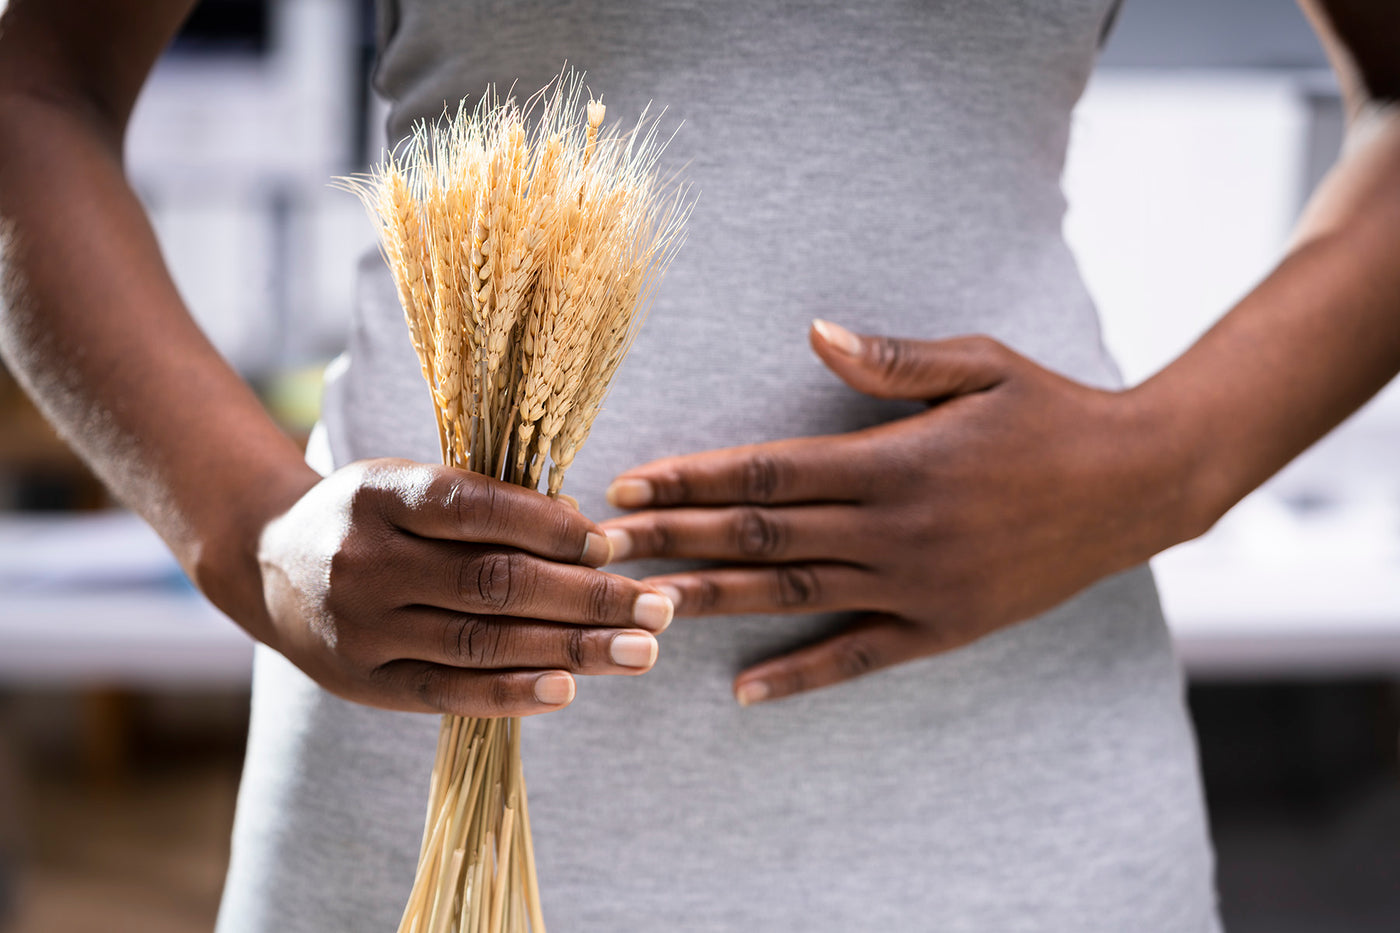 The midsection of a woman is shown. In one hand, she is holding a bunch of wheat. The other hand is over her stomach indicating that she has celiac disease.